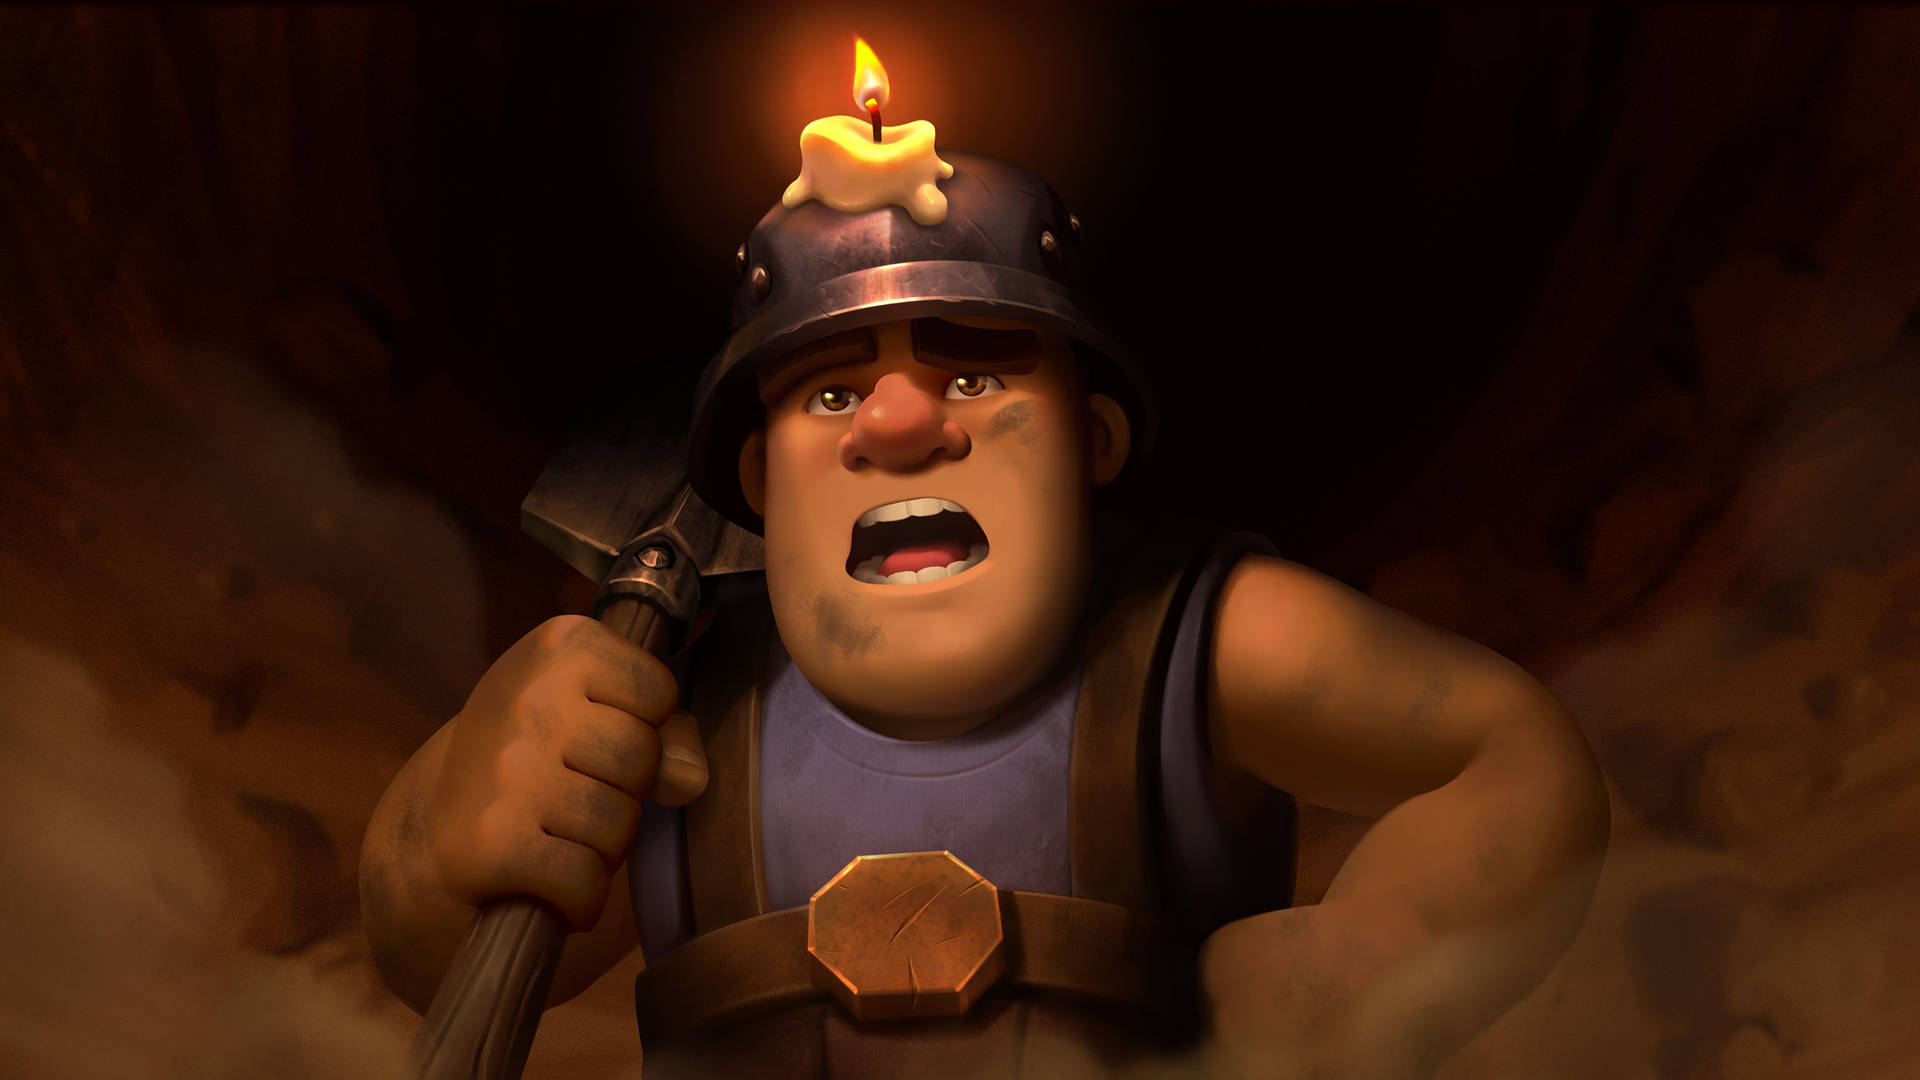 Miner From The Clash Royale Phone Game In A Cave